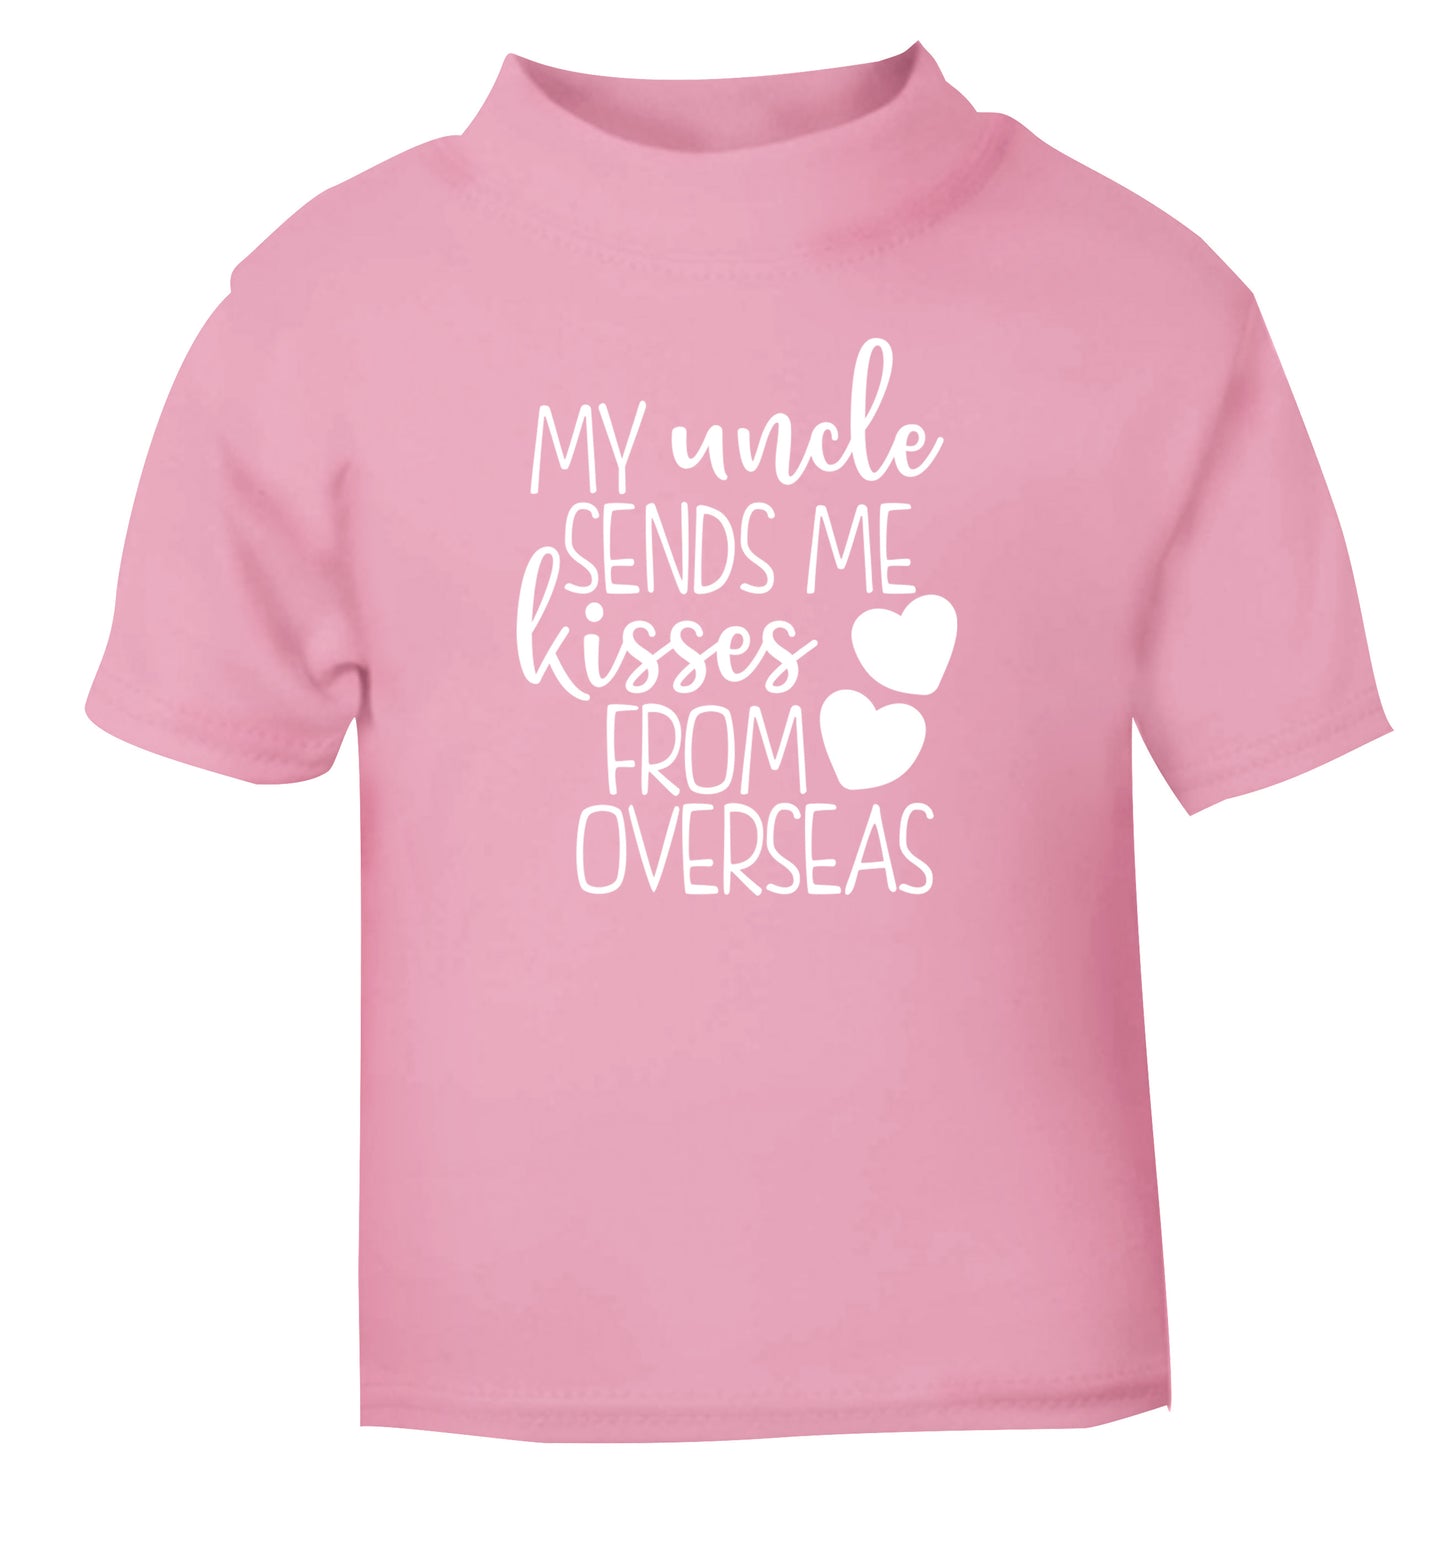 My uncle sends me kisses from overseas light pink Baby Toddler Tshirt 2 Years